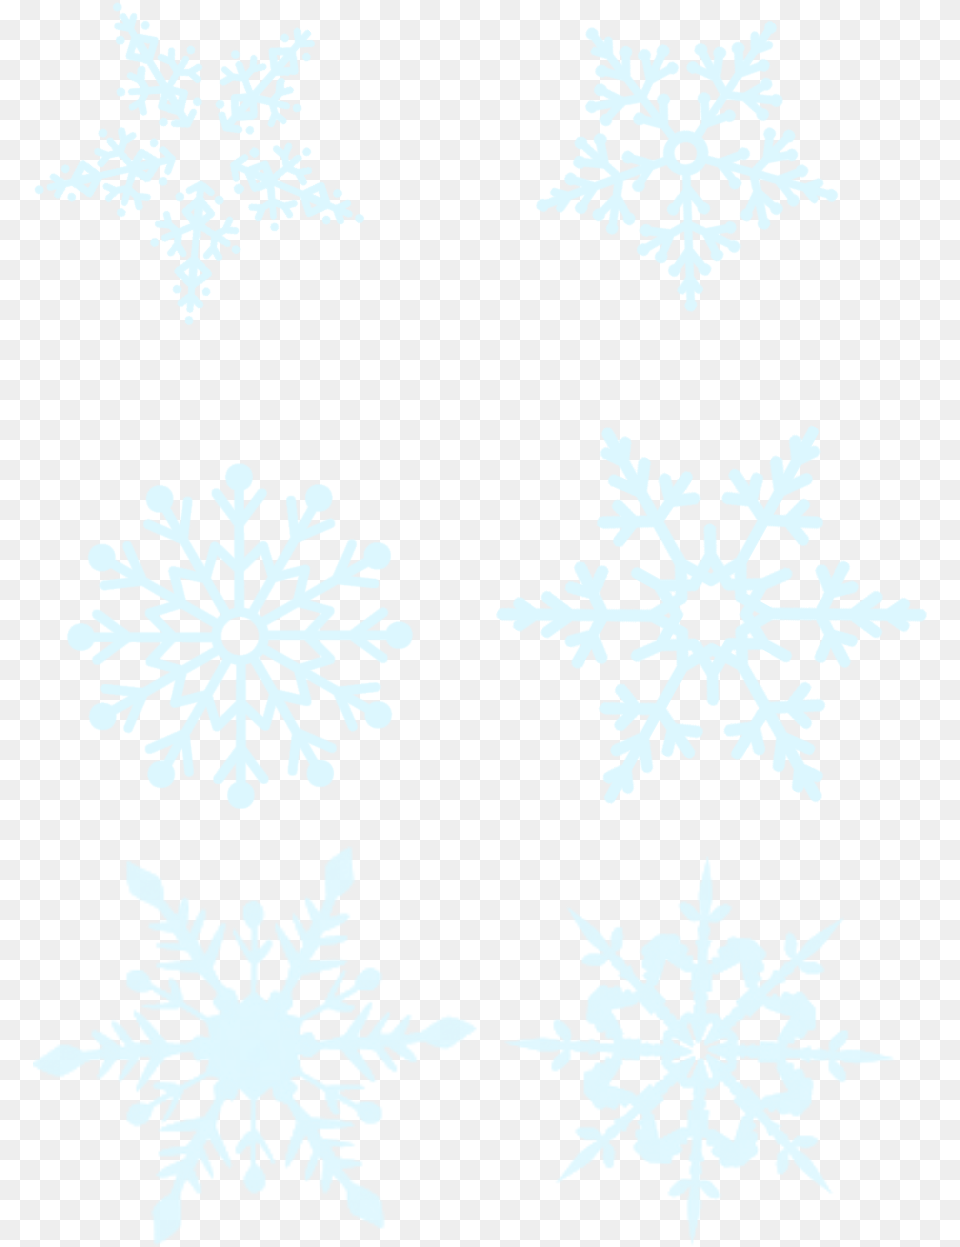 Blue Snowflakes Winter Commercial Elements And Snowflake, Nature, Outdoors, Snow, Festival Png Image